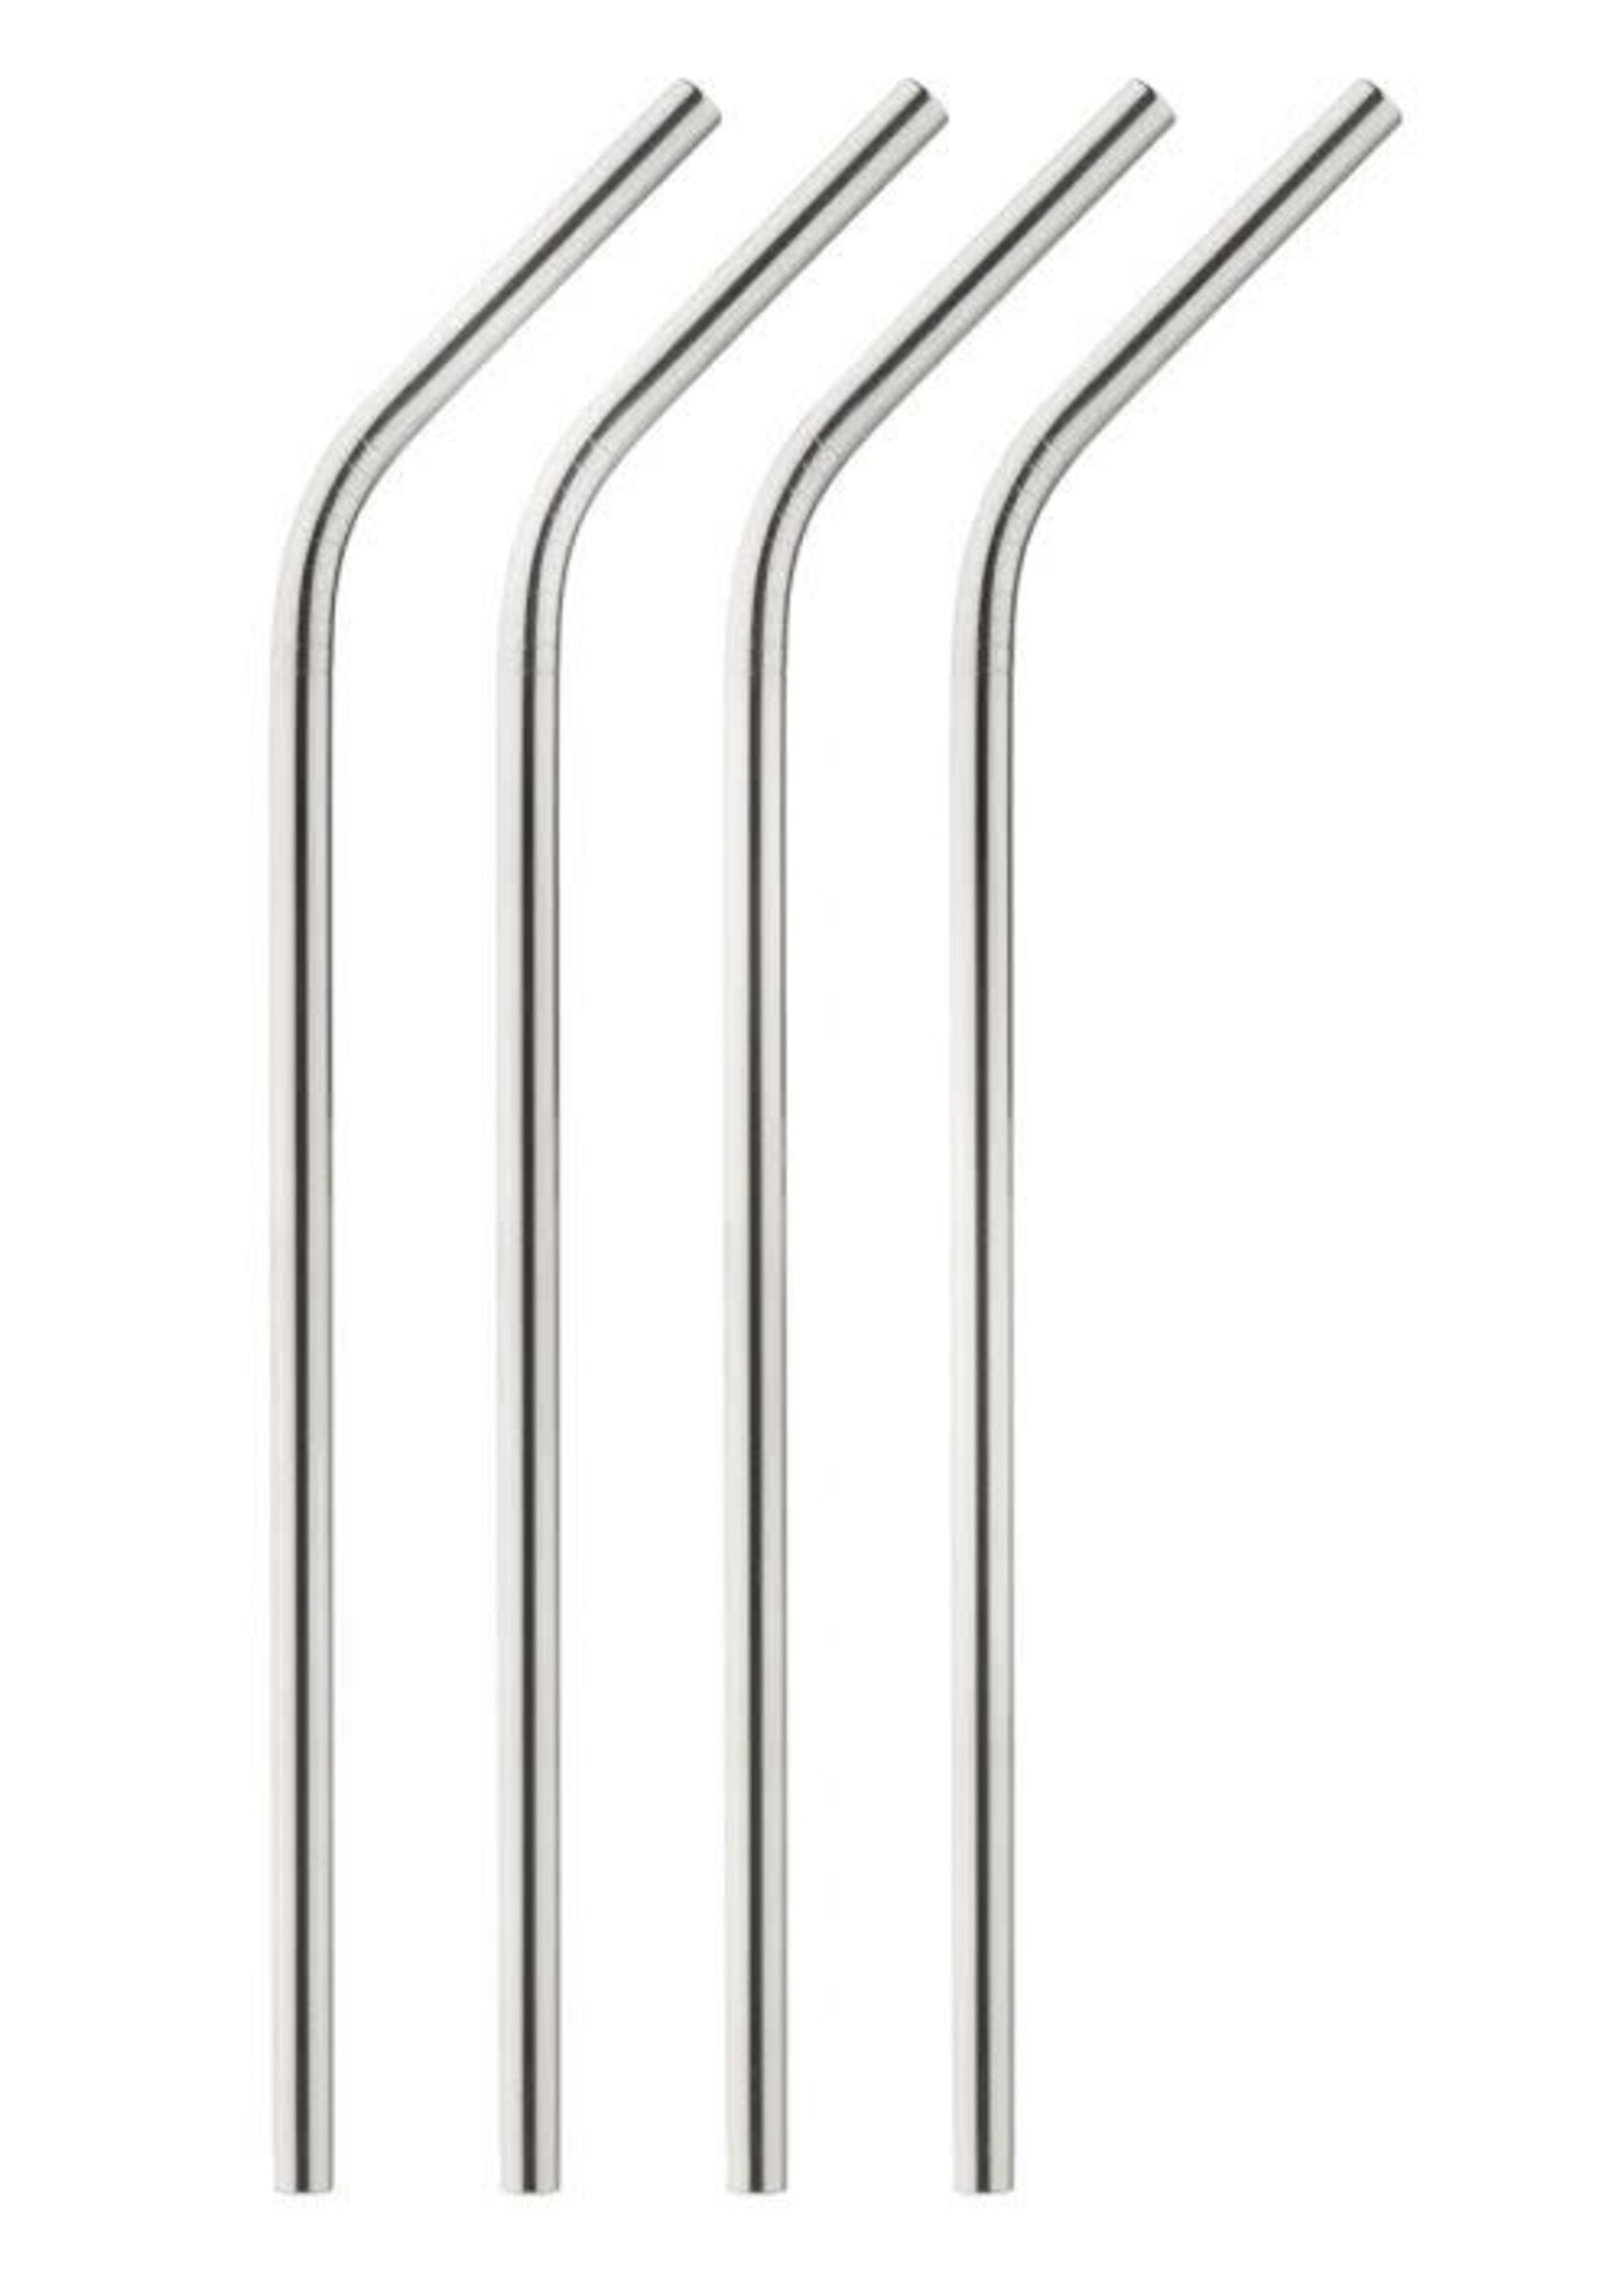 Harold Import Company Inc. Stainless Steel Straws w/ Cleaning Brush